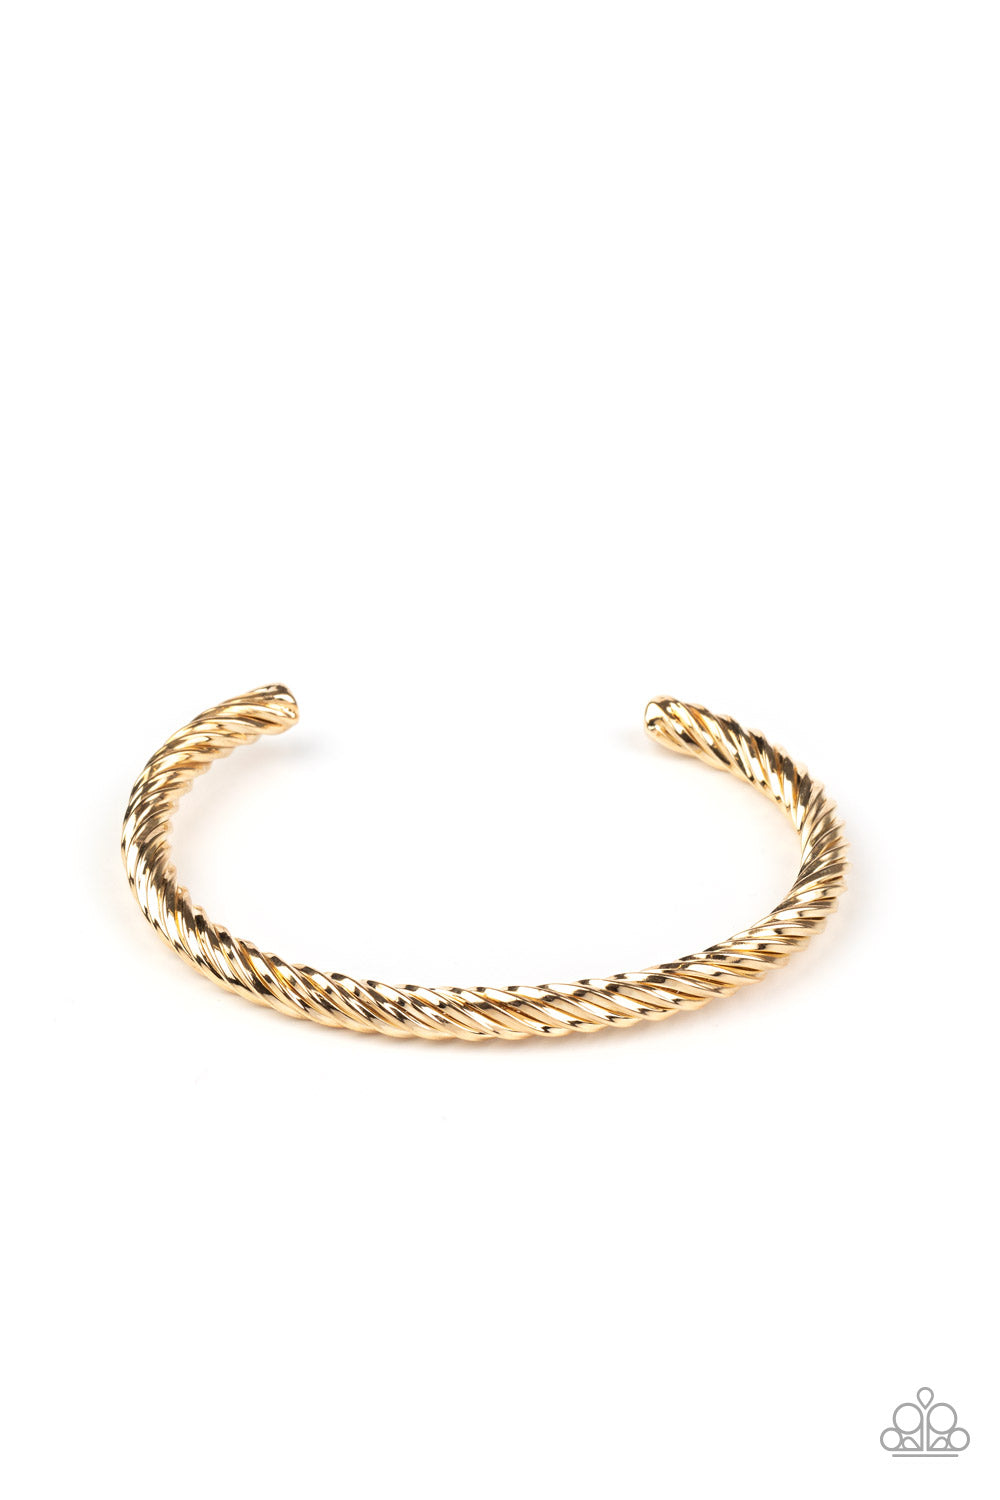 Paparazzi Mach Speed - Gold Bracelet - A Finishing Touch 